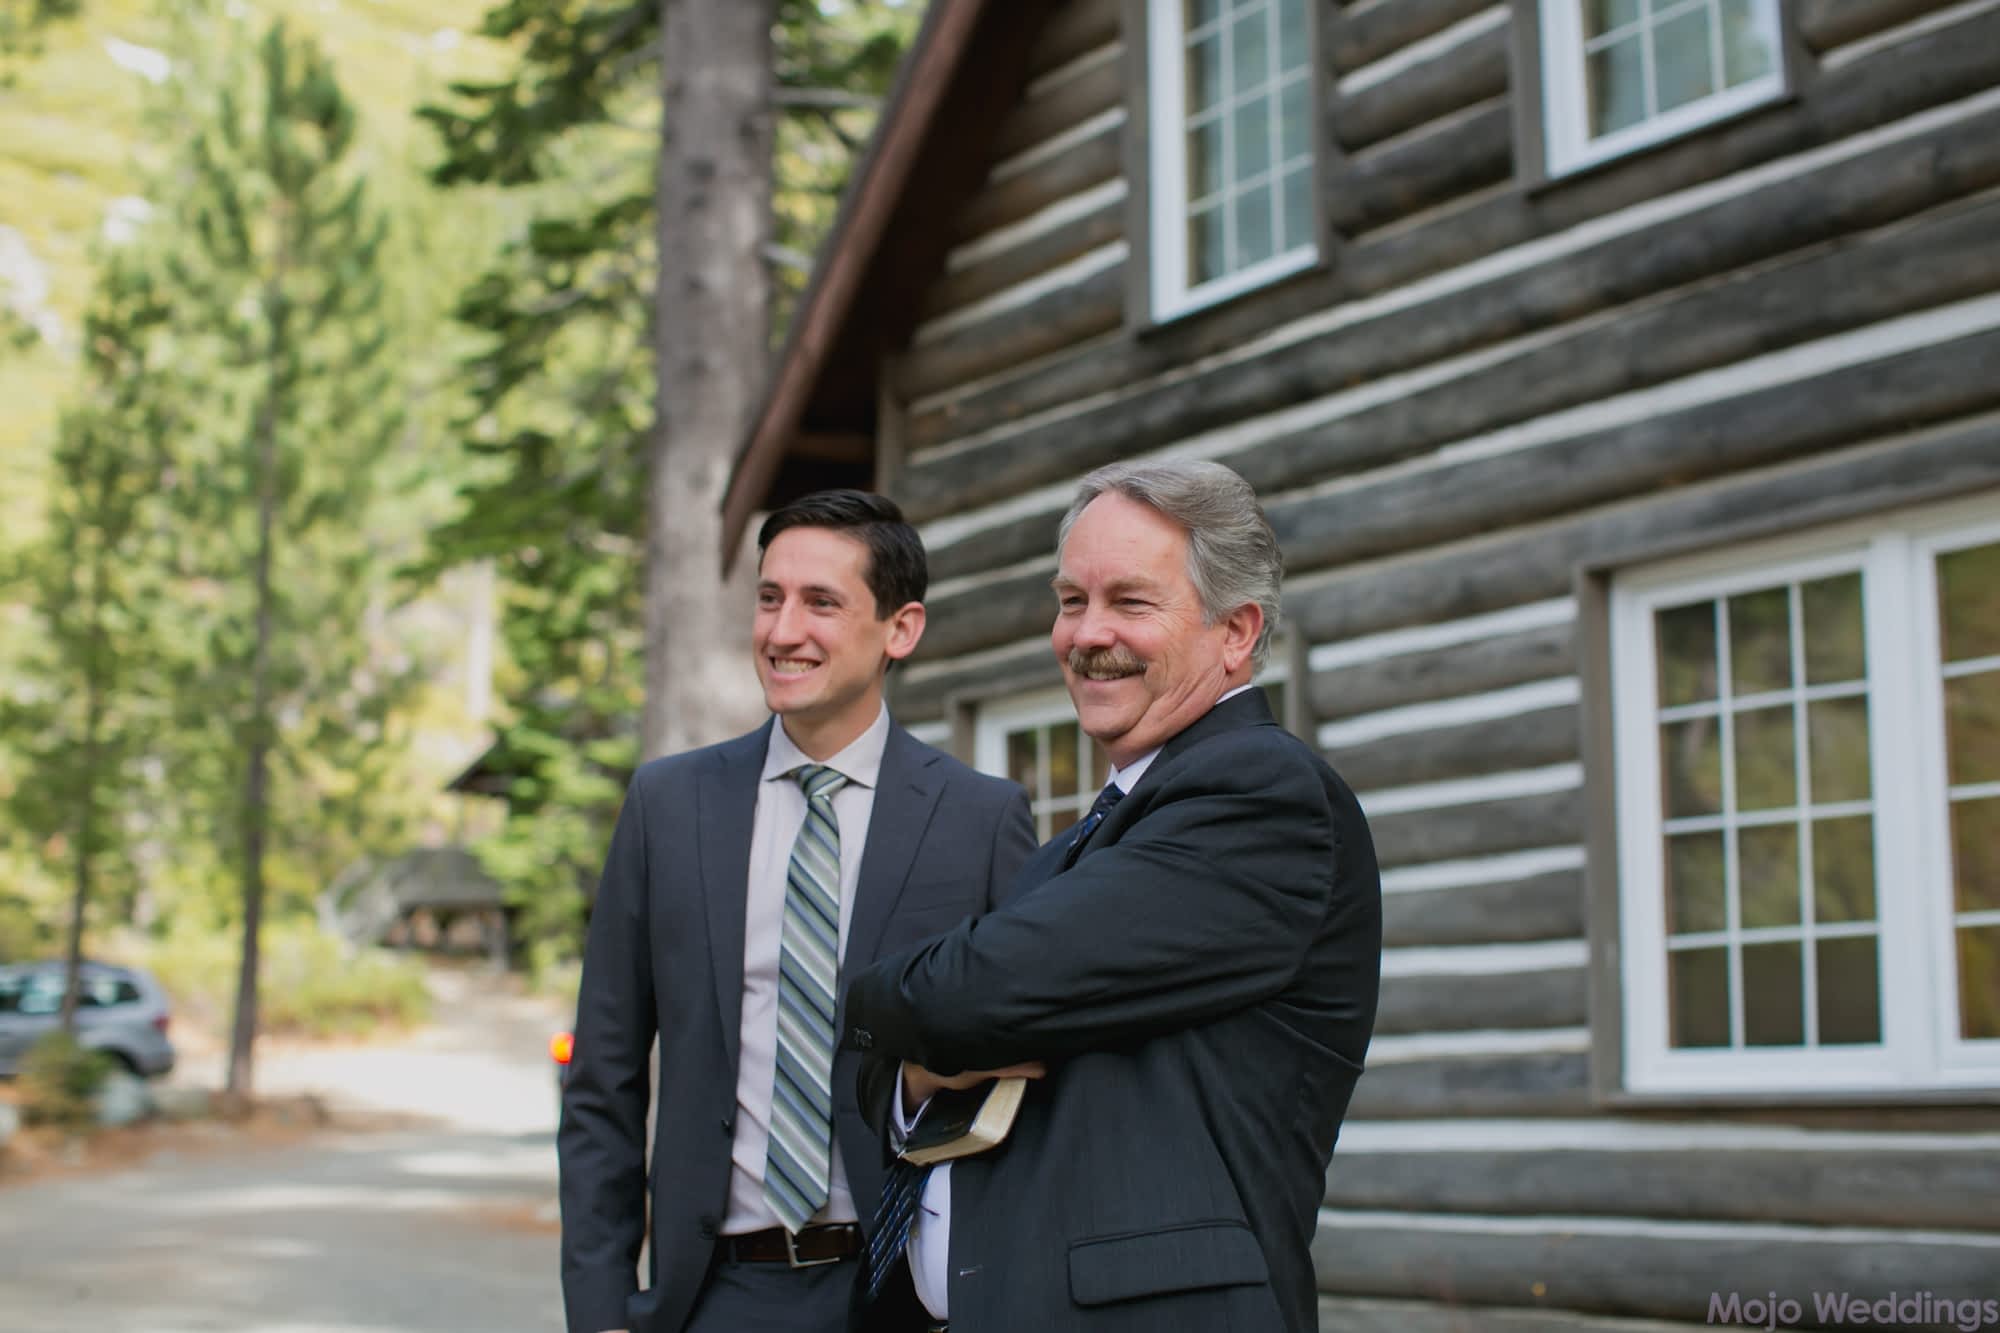 The groom and officiant smile before the ceremony with a log cabin in the background.